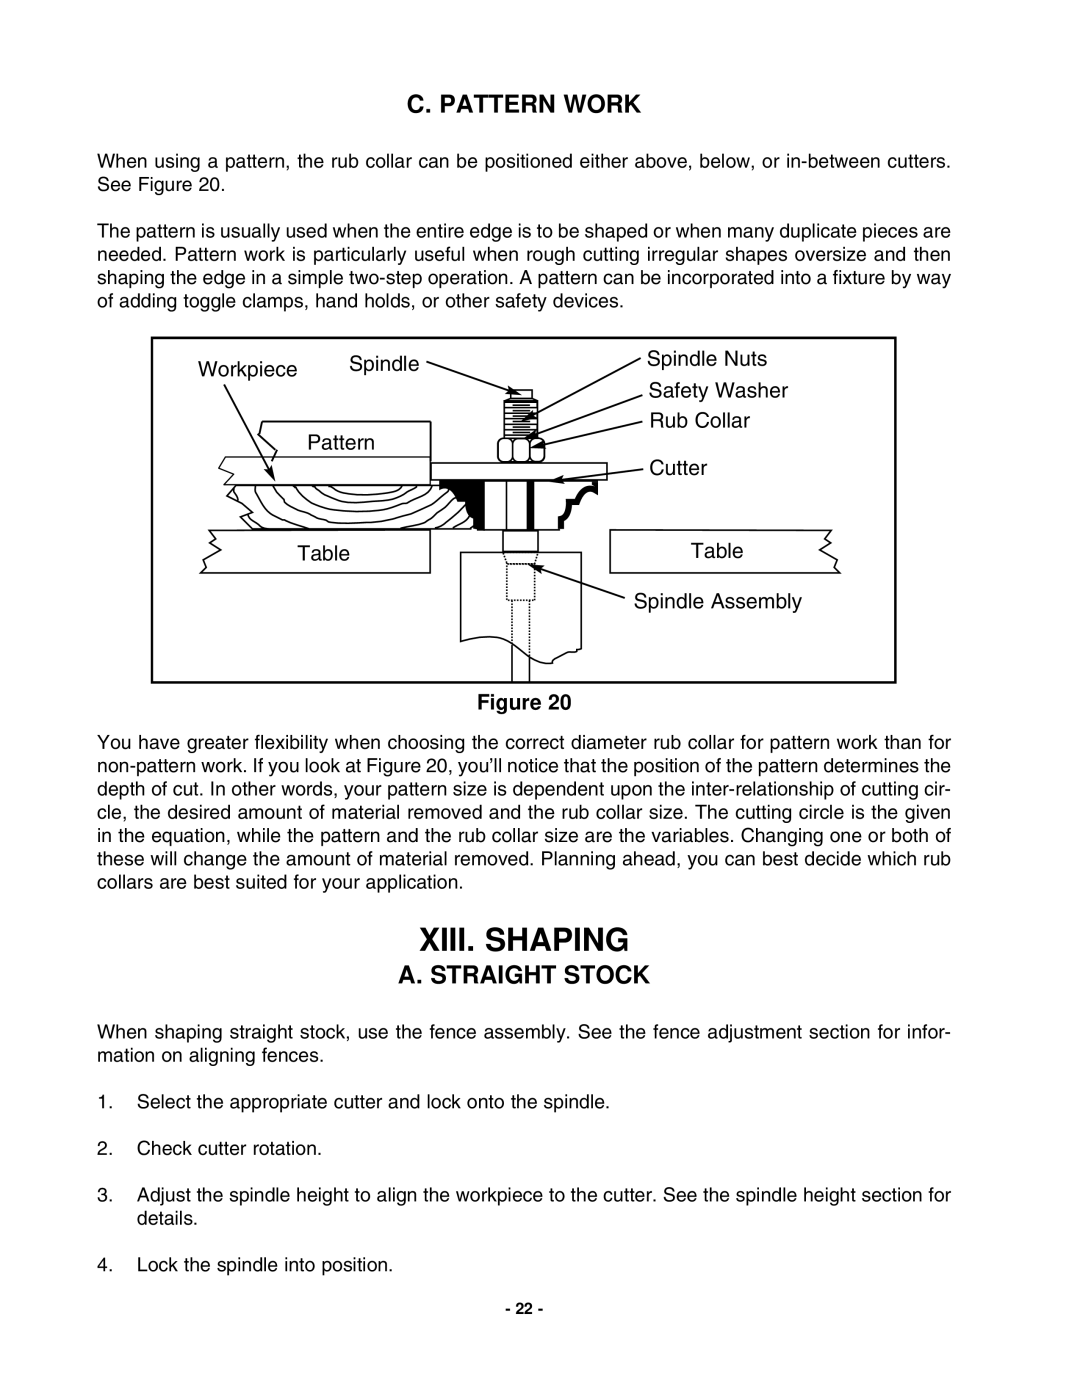 Grizzly G1024 instruction manual Xiii. Shaping, C. Pattern Work, A. Straight Stock 